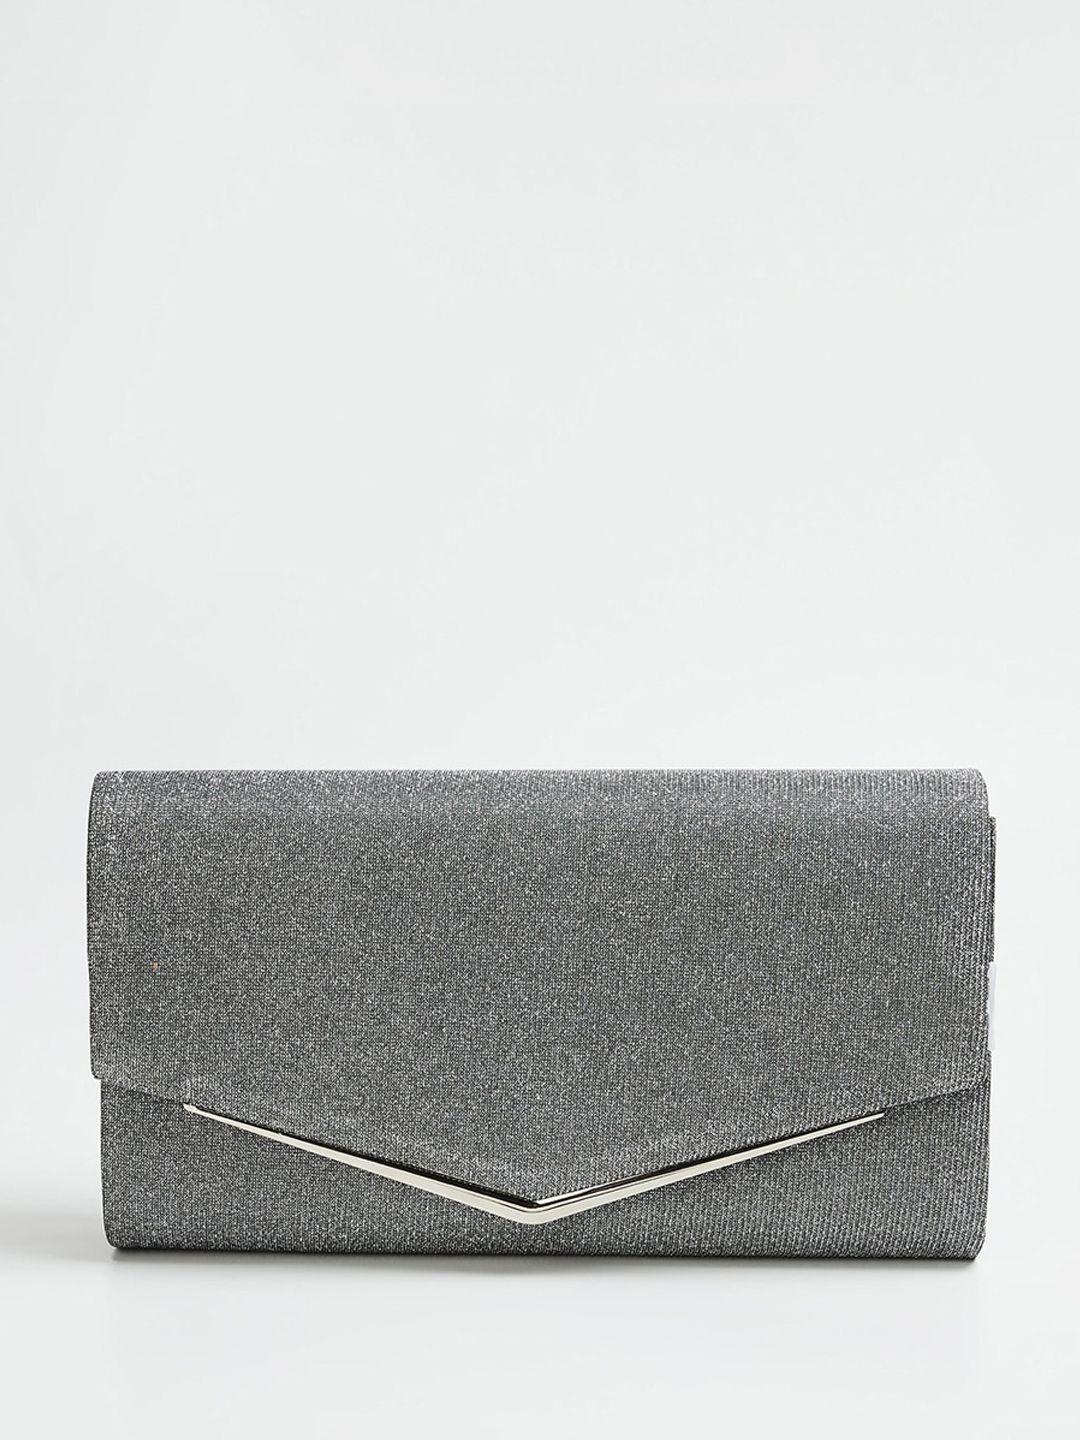 code by lifestyle textured structured envelope clutches